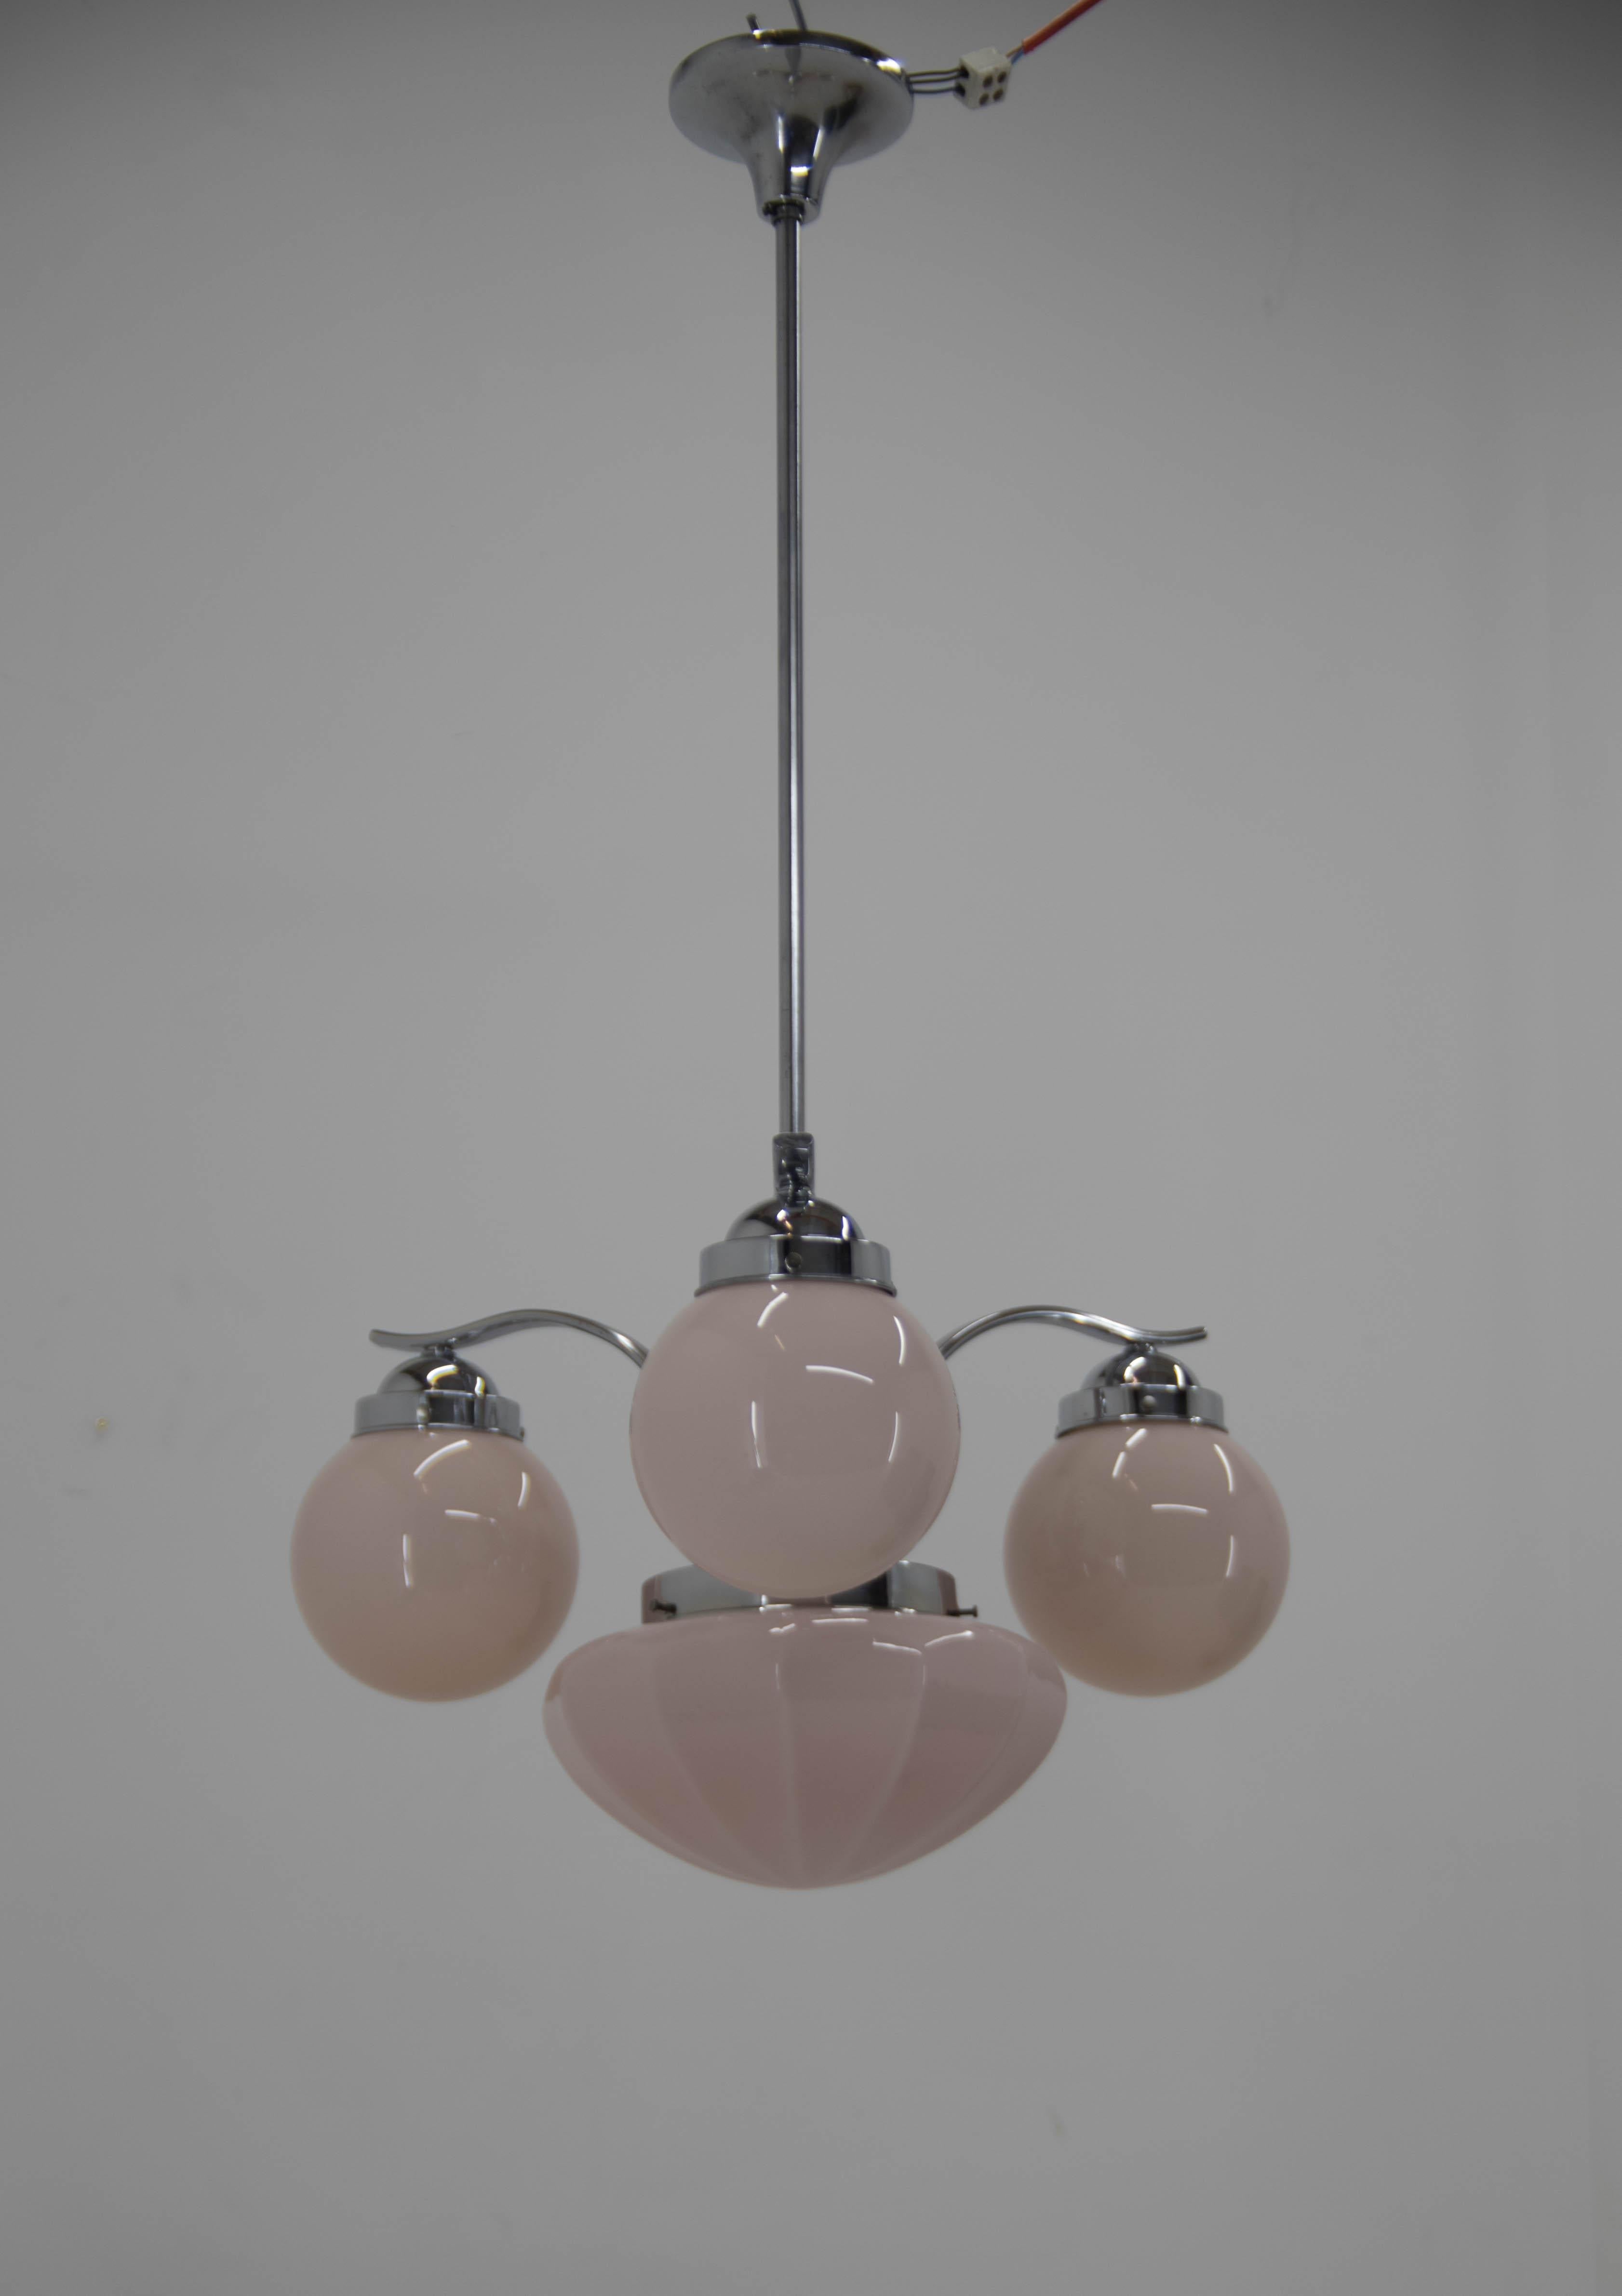 Elegant pink glass Art Deco chandelier.
Restored: chrome polished
Rewired: two separate circuits - 3+1x40W, E25-E27 bulbs
Height could be shortened on request.
US wiring compatible.